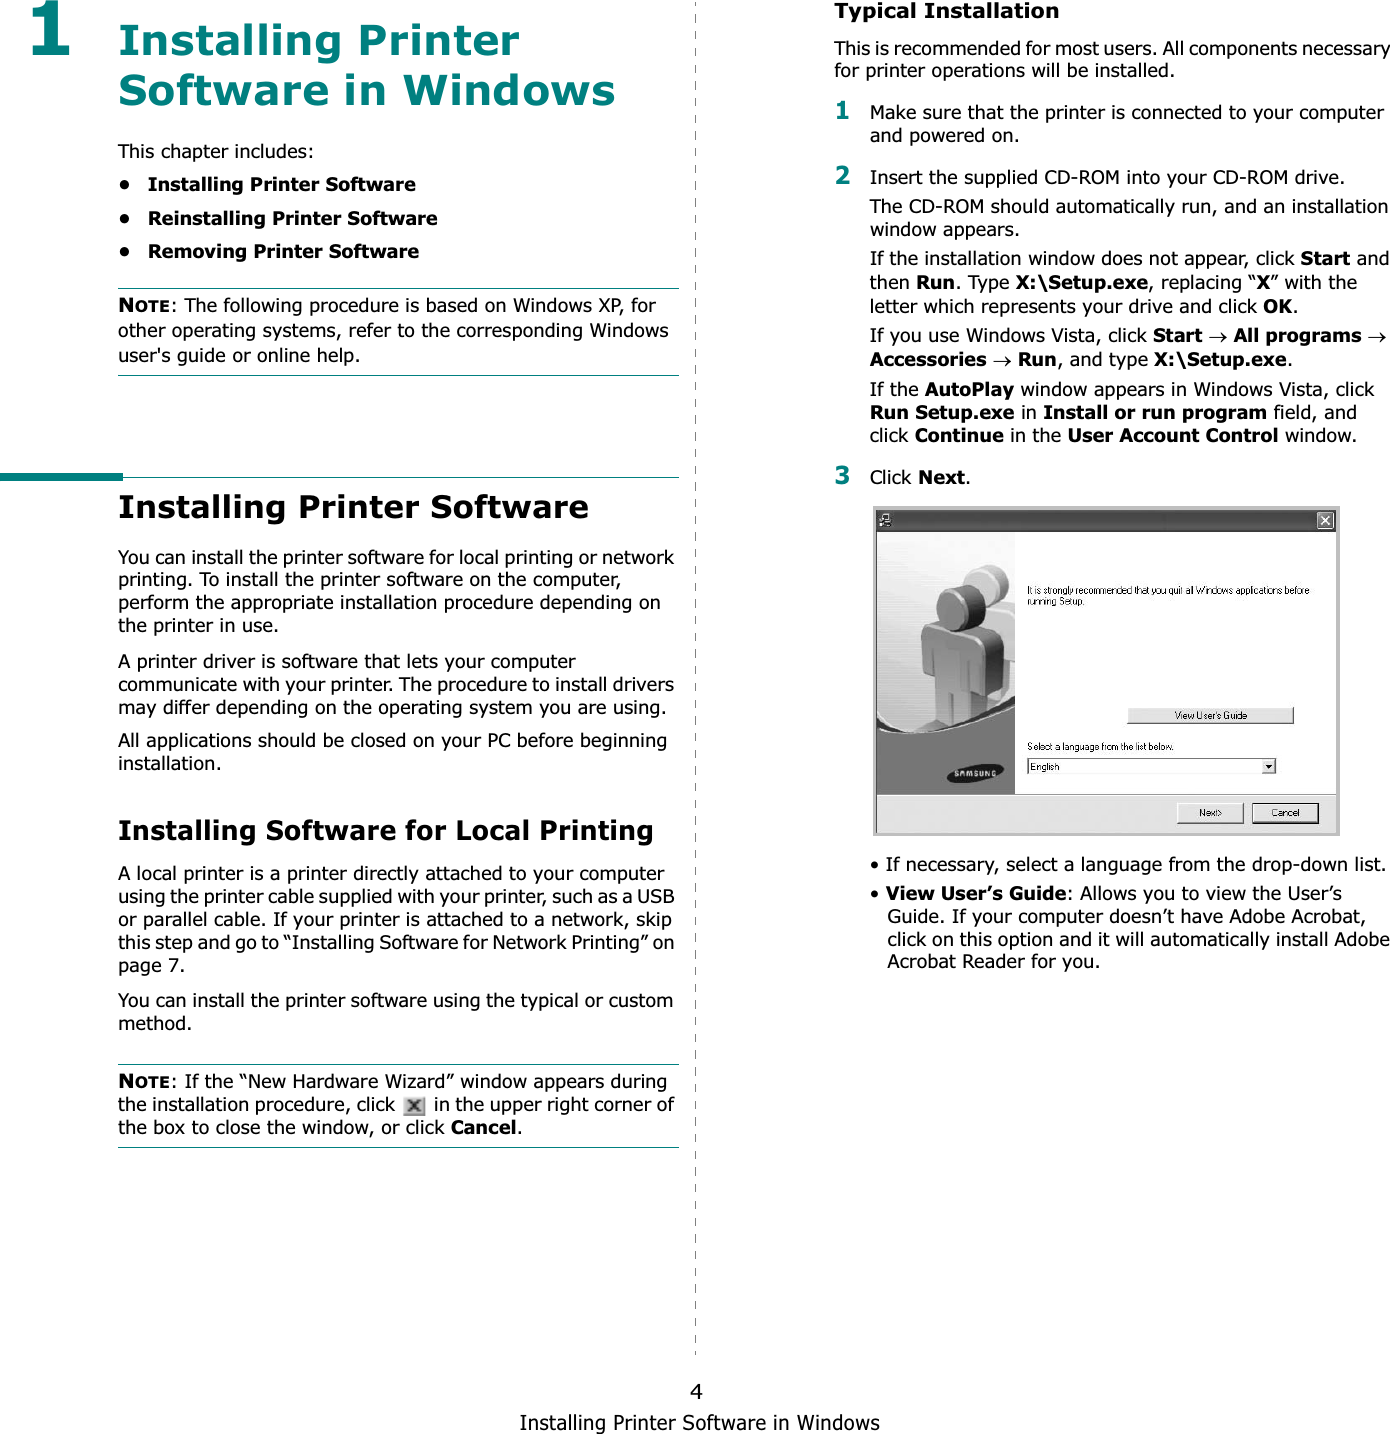 Installing Printer Software in Windows41Installing Printer Software in WindowsThis chapter includes:• Installing Printer Software• Reinstalling Printer Software• Removing Printer SoftwareNOTE: The following procedure is based on Windows XP, for other operating systems, refer to the corresponding Windows user&apos;s guide or online help.Installing Printer SoftwareYou can install the printer software for local printing or network printing. To install the printer software on the computer, perform the appropriate installation procedure depending on the printer in use.A printer driver is software that lets your computer communicate with your printer. The procedure to install drivers may differ depending on the operating system you are using.All applications should be closed on your PC before beginning installation. Installing Software for Local PrintingA local printer is a printer directly attached to your computer using the printer cable supplied with your printer, such as a USB or parallel cable. If your printer is attached to a network, skip this step and go to “Installing Software for Network Printing” on page 7.You can install the printer software using the typical or custom method.NOTE: If the “New Hardware Wizard” window appears during the installation procedure, click   in the upper right corner of the box to close the window, or click Cancel.Typical InstallationThis is recommended for most users. All components necessary for printer operations will be installed.1Make sure that the printer is connected to your computer and powered on.2Insert the supplied CD-ROM into your CD-ROM drive.The CD-ROM should automatically run, and an installation window appears.If the installation window does not appear, click Start and then Run. Type X:\Setup.exe, replacing “X” with the letter which represents your drive and click OK.If you use Windows Vista, click StartoAll programsoAccessoriesoRun, and type X:\Setup.exe.If the AutoPlay window appears in Windows Vista, click Run Setup.exe in Install or run program field, and click Continue in the User Account Control window.3Click Next.• If necessary, select a language from the drop-down list.•View User’s Guide: Allows you to view the User’s Guide. If your computer doesn’t have Adobe Acrobat, click on this option and it will automatically install Adobe Acrobat Reader for you.